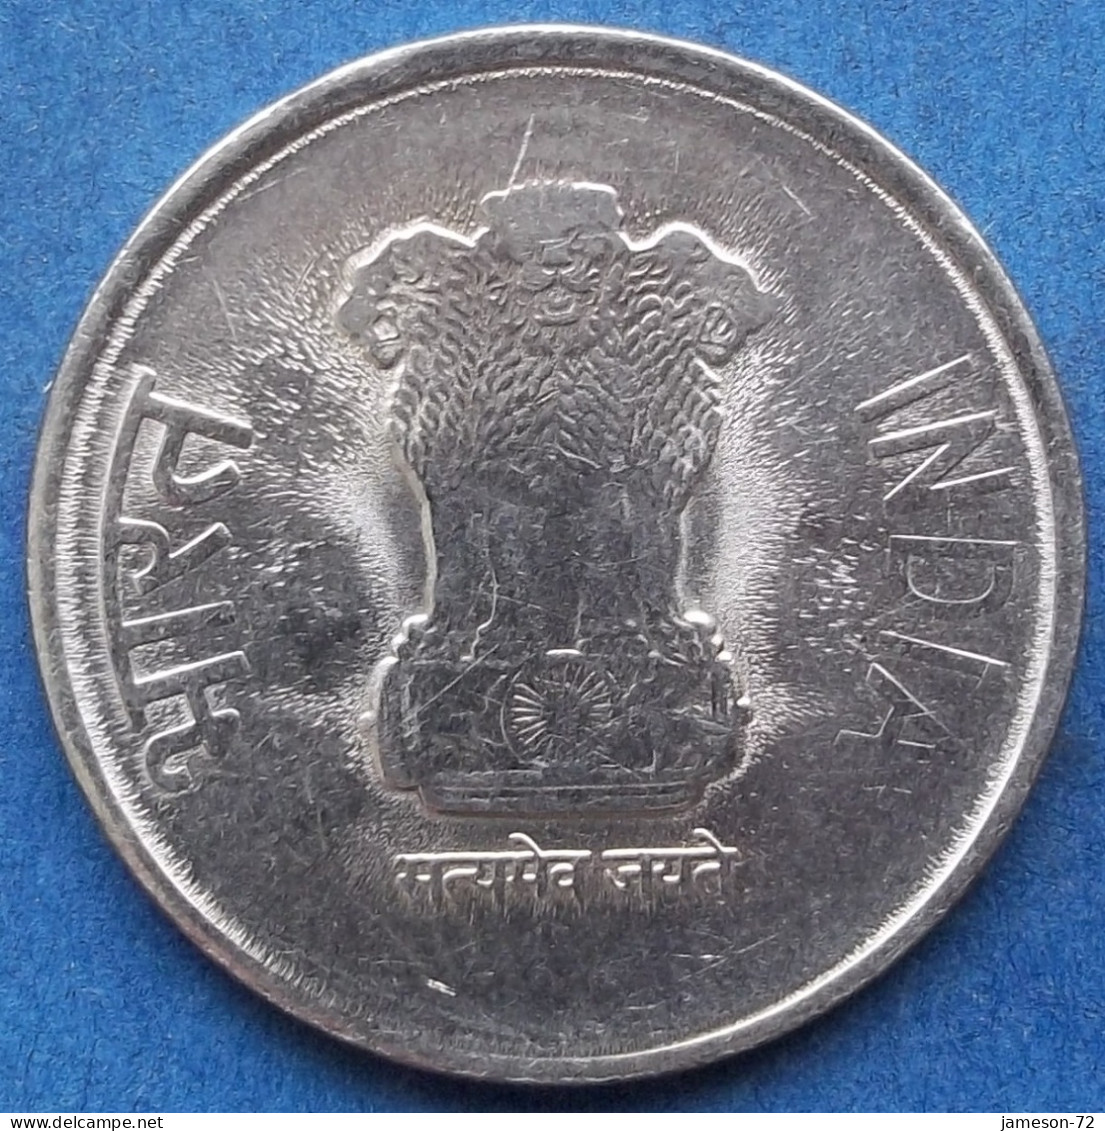 INDIA - 2 Rupees 2018 "Lotus Flowers" KM# 395 Republic Decimal Coinage (1957) - Edelweiss Coins - Georgia